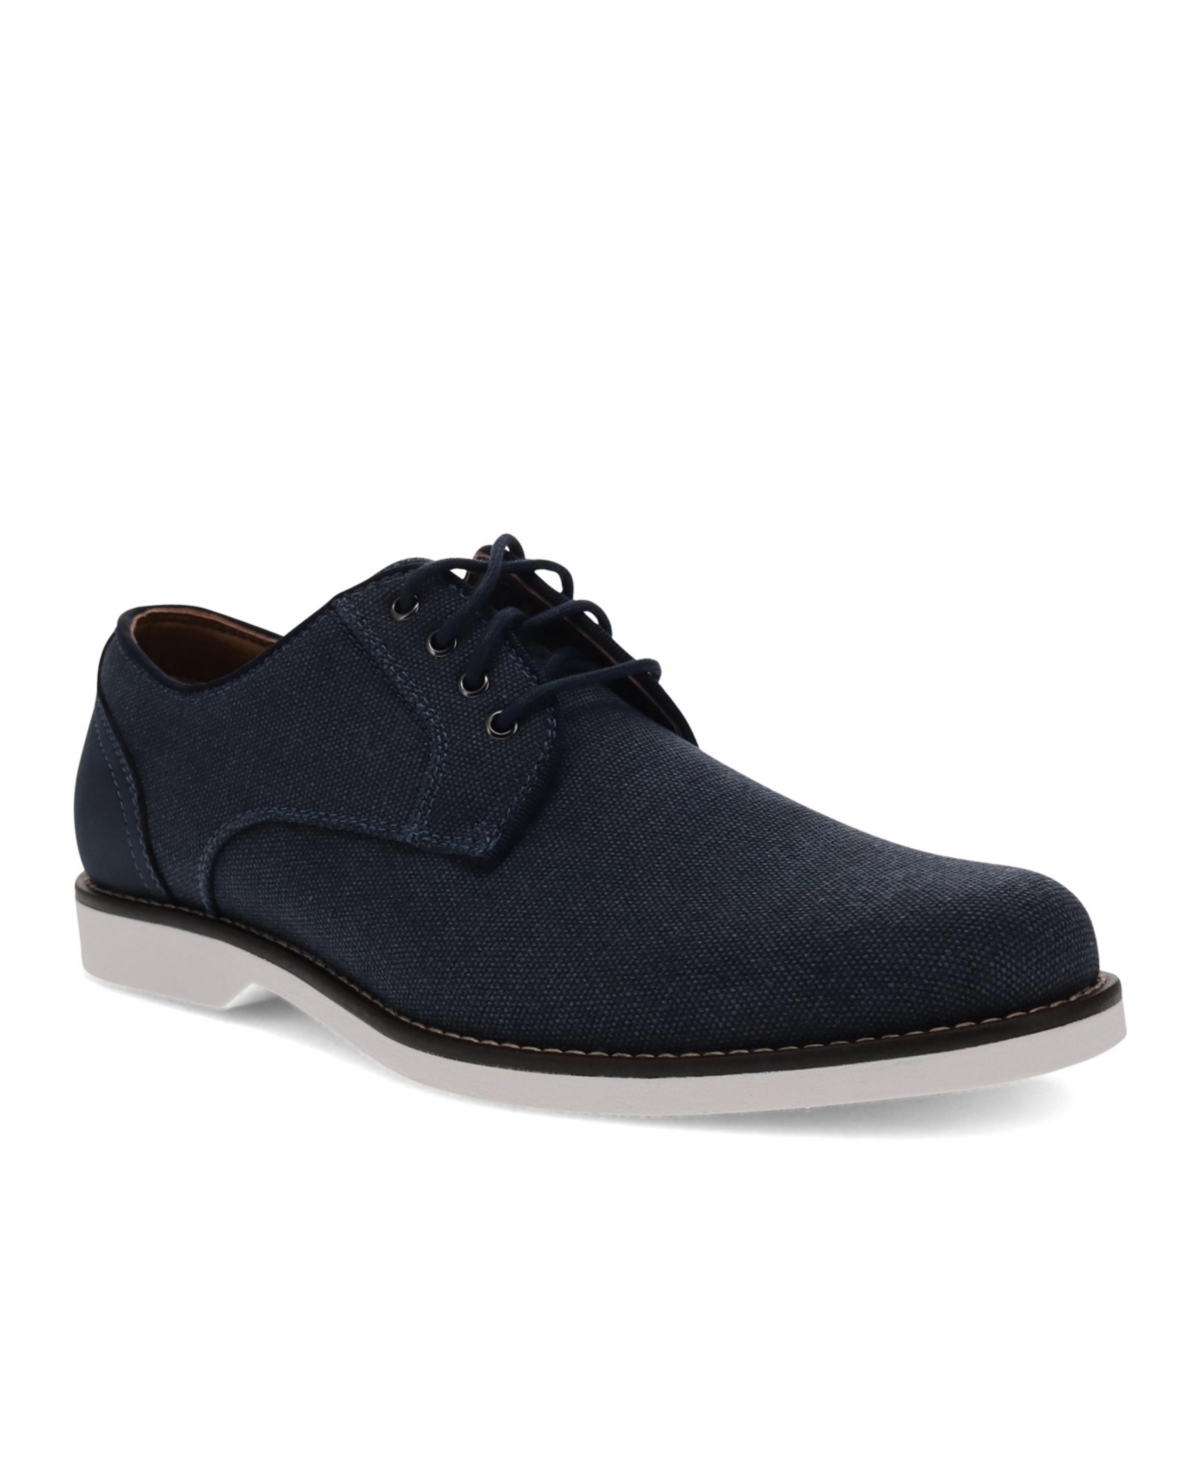 Dockers Men's Pryce Casual Oxford Shoes In Navy